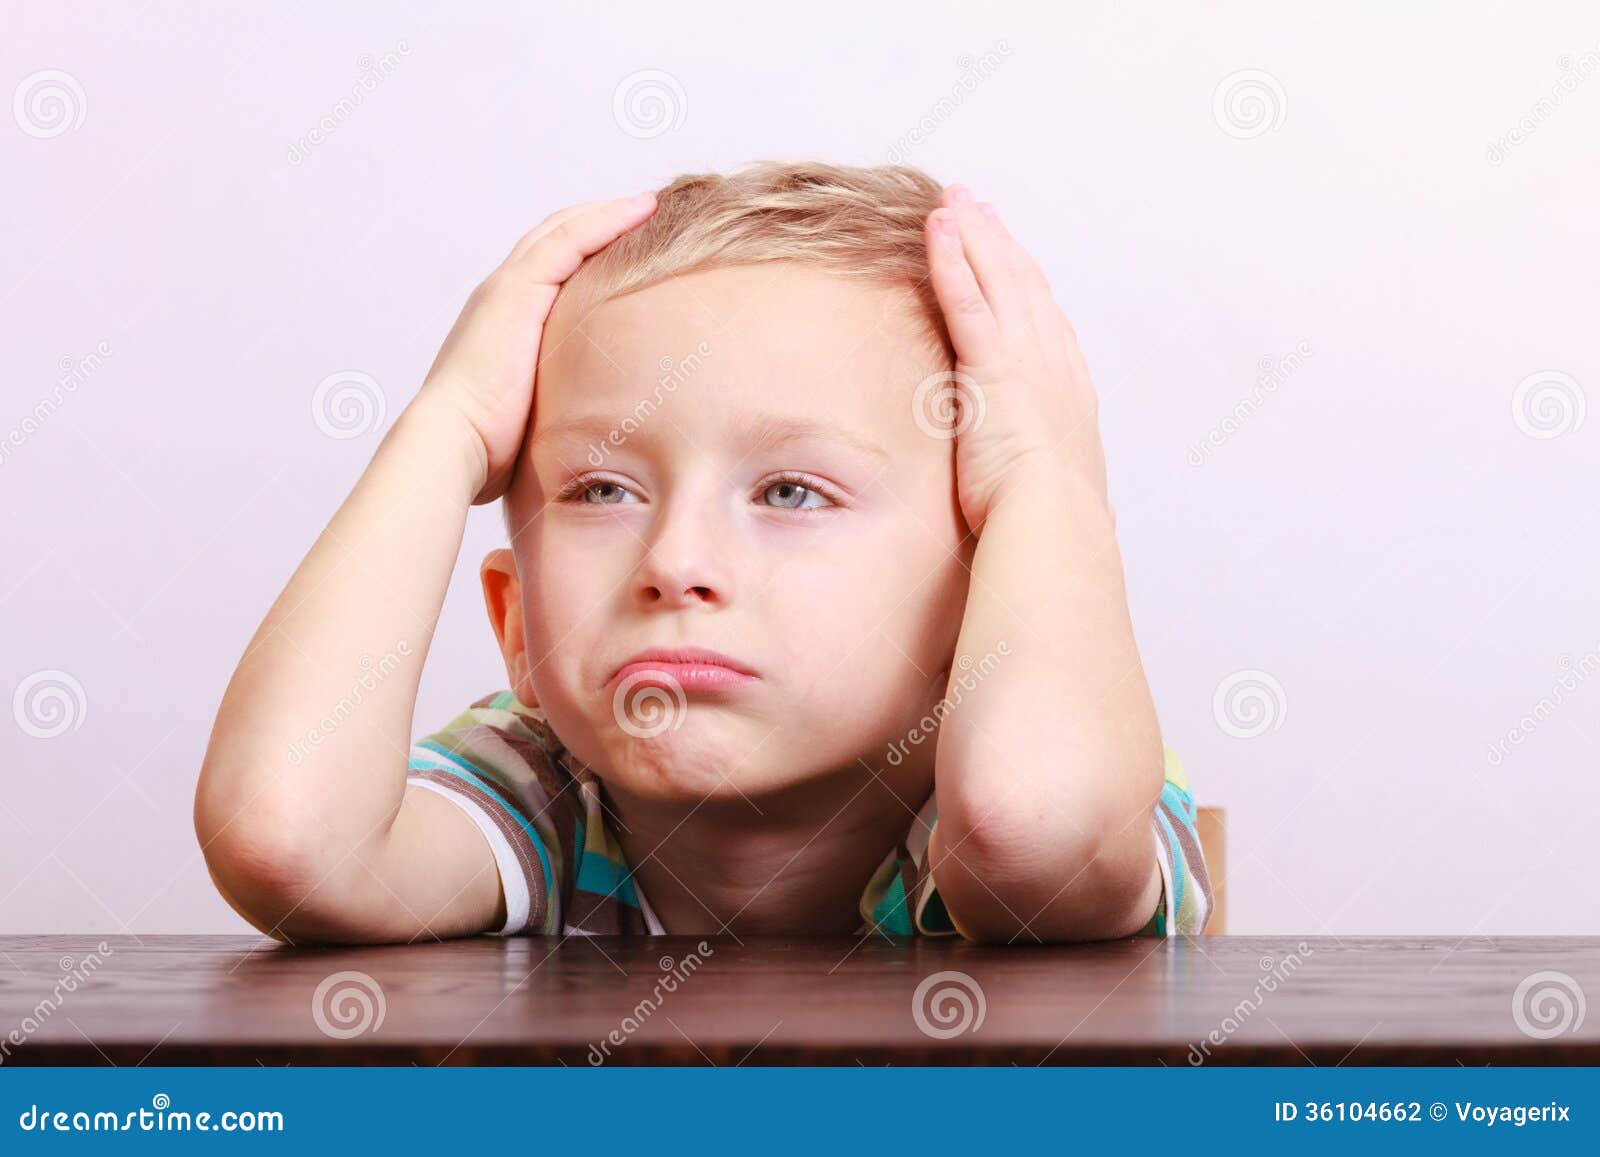 Portrait of Sad Emotional Blond Boy Child Kid at the Table Stock Photo -  Image of blond, cute: 36104662